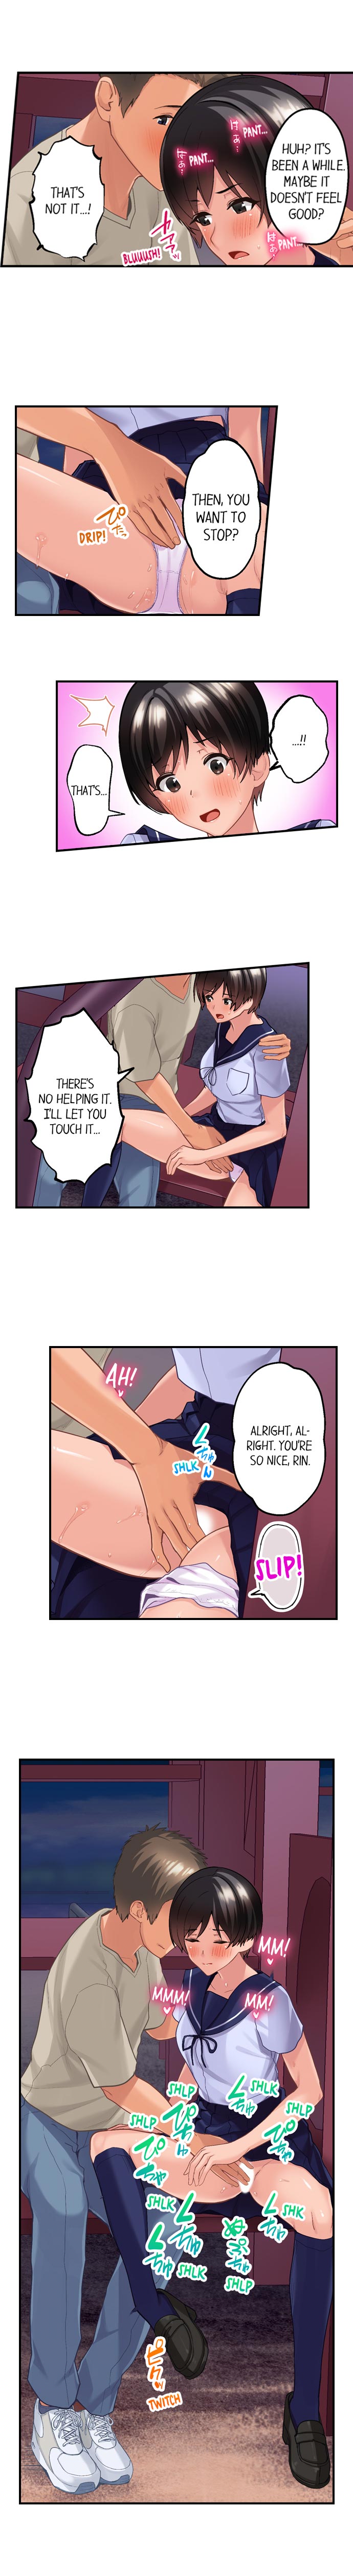 Using 100 Boxes of Condoms With My Childhood Friend! - Chapter 14 Page 6